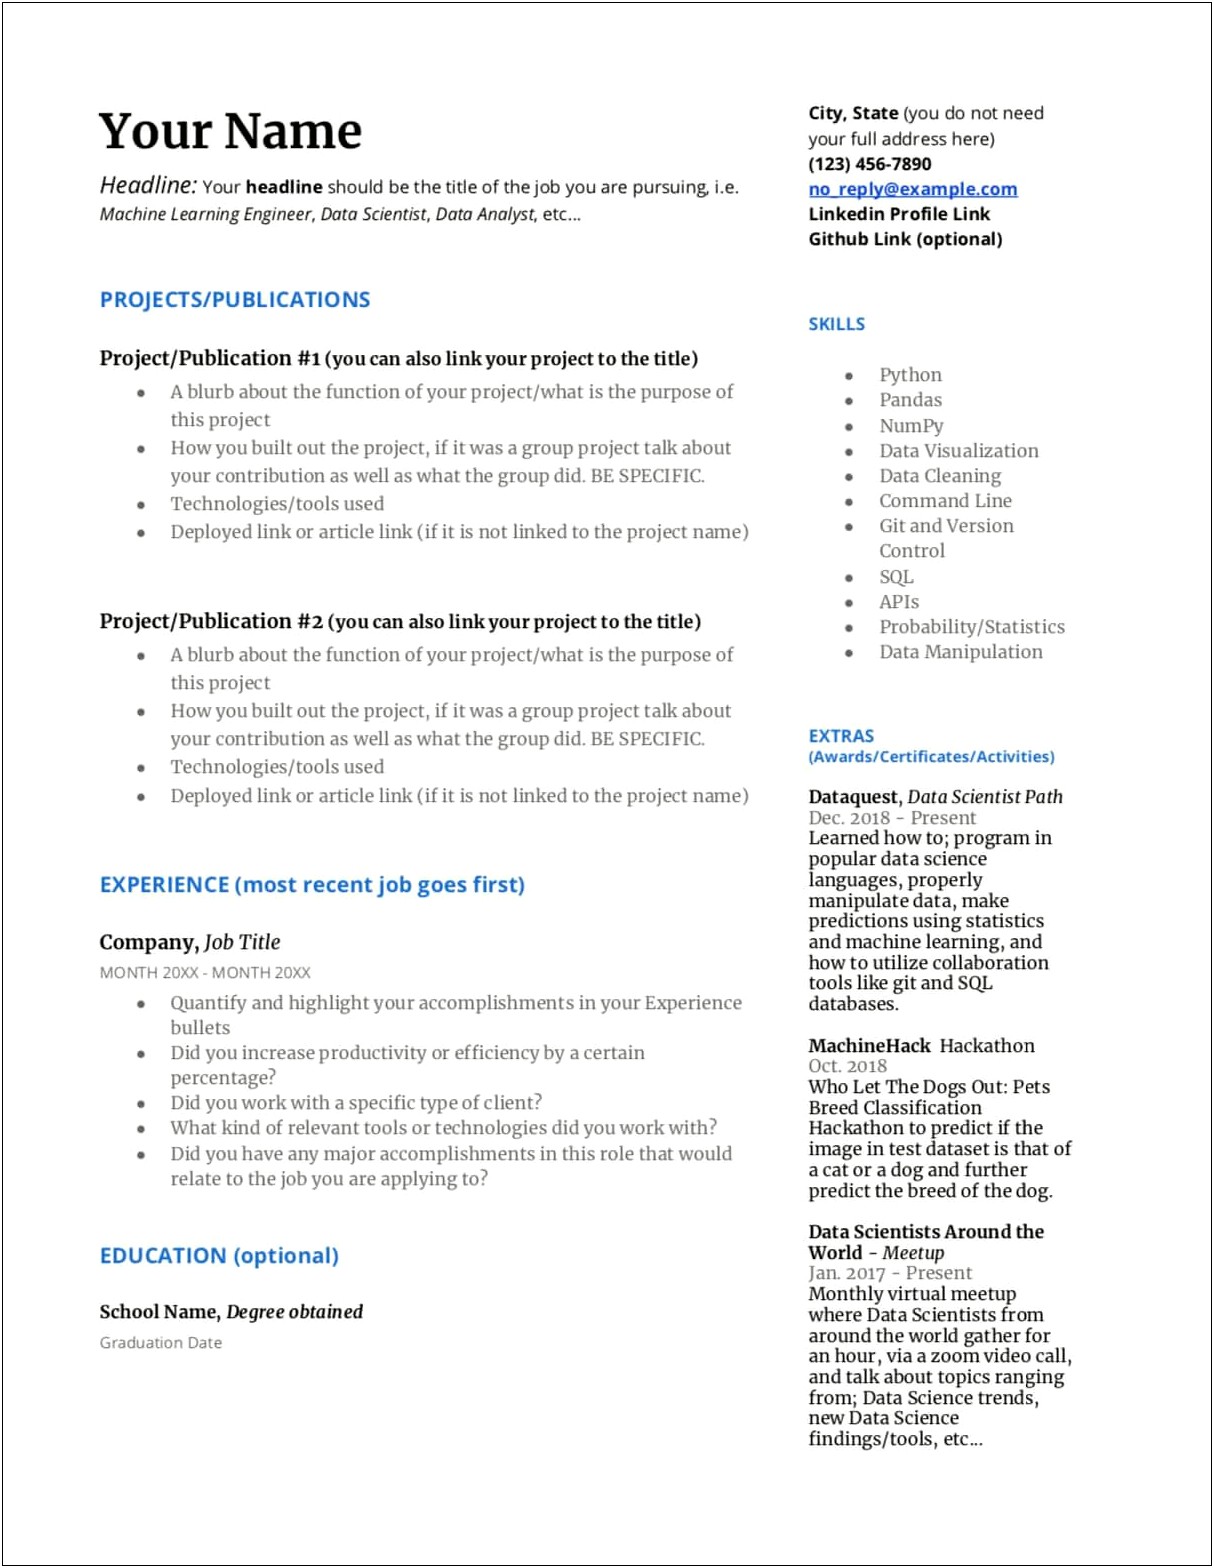 Sample Resume For College Graduates In Information Technology